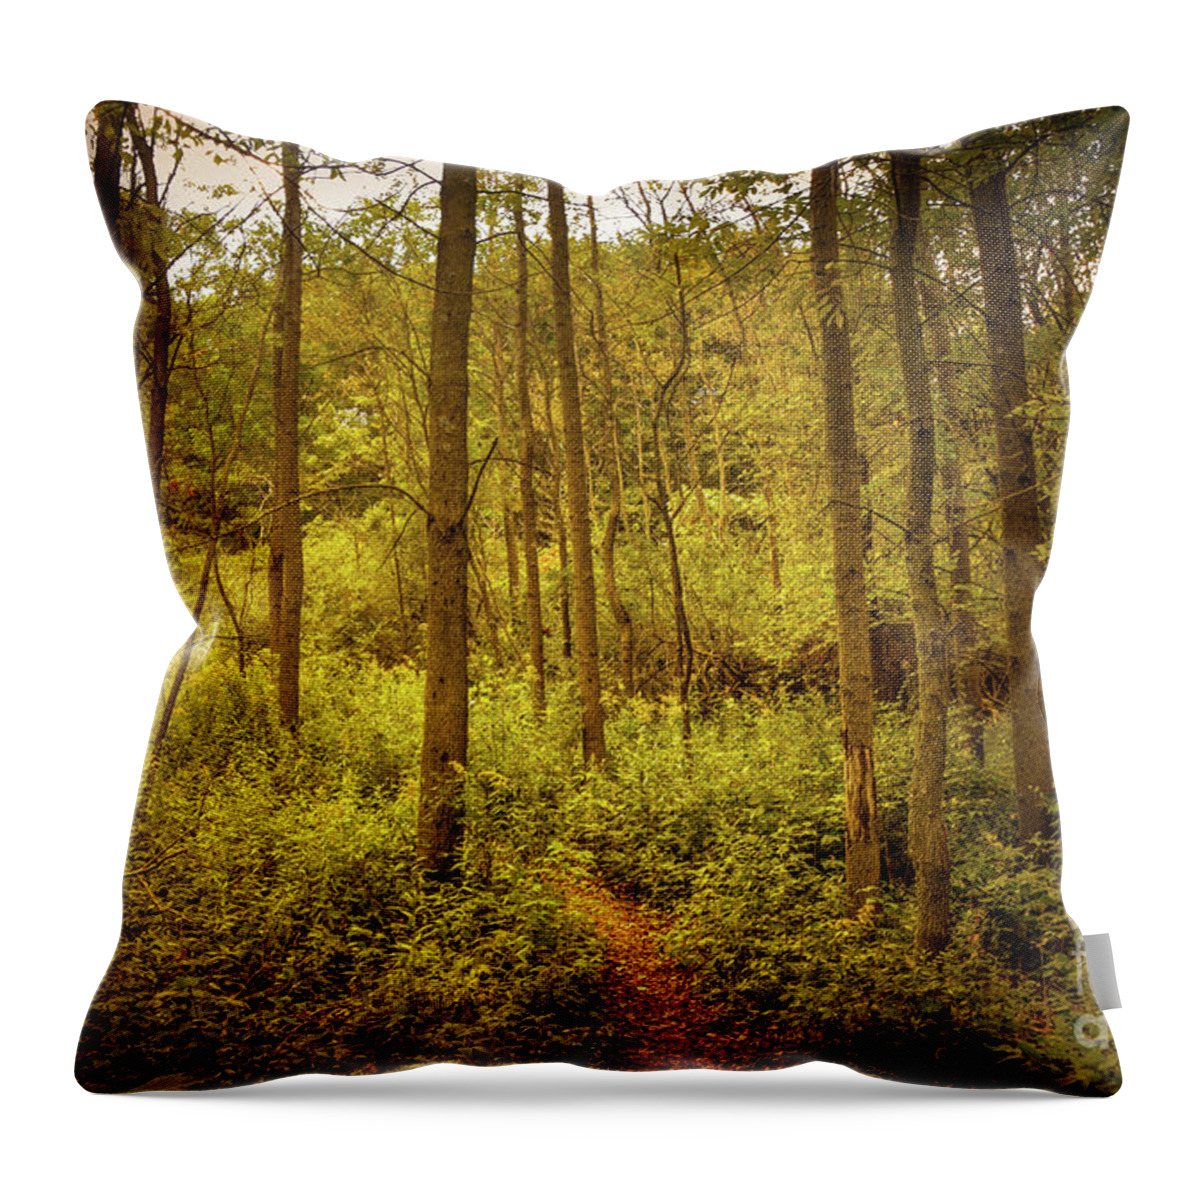 Into The Woods Throw Pillow featuring the photograph Into The Woods by Mary Machare